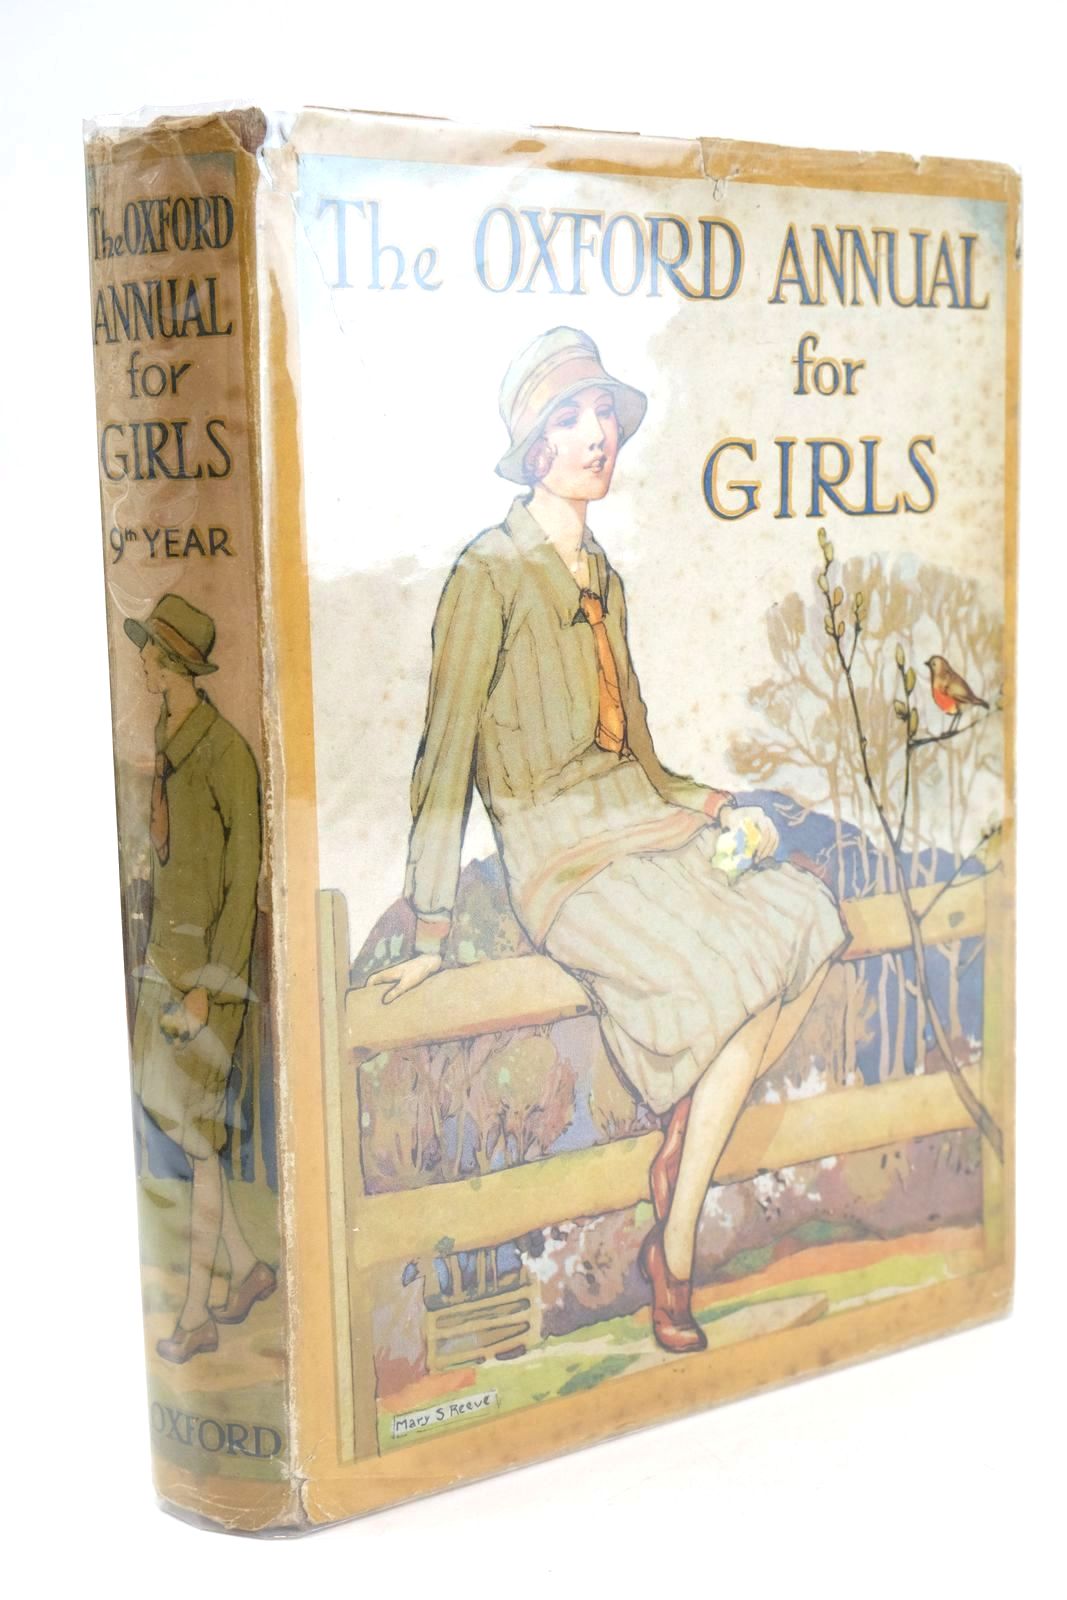 Photo of THE OXFORD ANNUAL FOR GIRLS 9TH YEAR written by Hayes, Nancy M. Bruce, Dorita Fairlie Helme, Eleanor et al, illustrated by Brock, C.E. Peart, M.A. et al., published by Oxford University Press, Humphrey Milford (STOCK CODE: 1324965)  for sale by Stella & Rose's Books